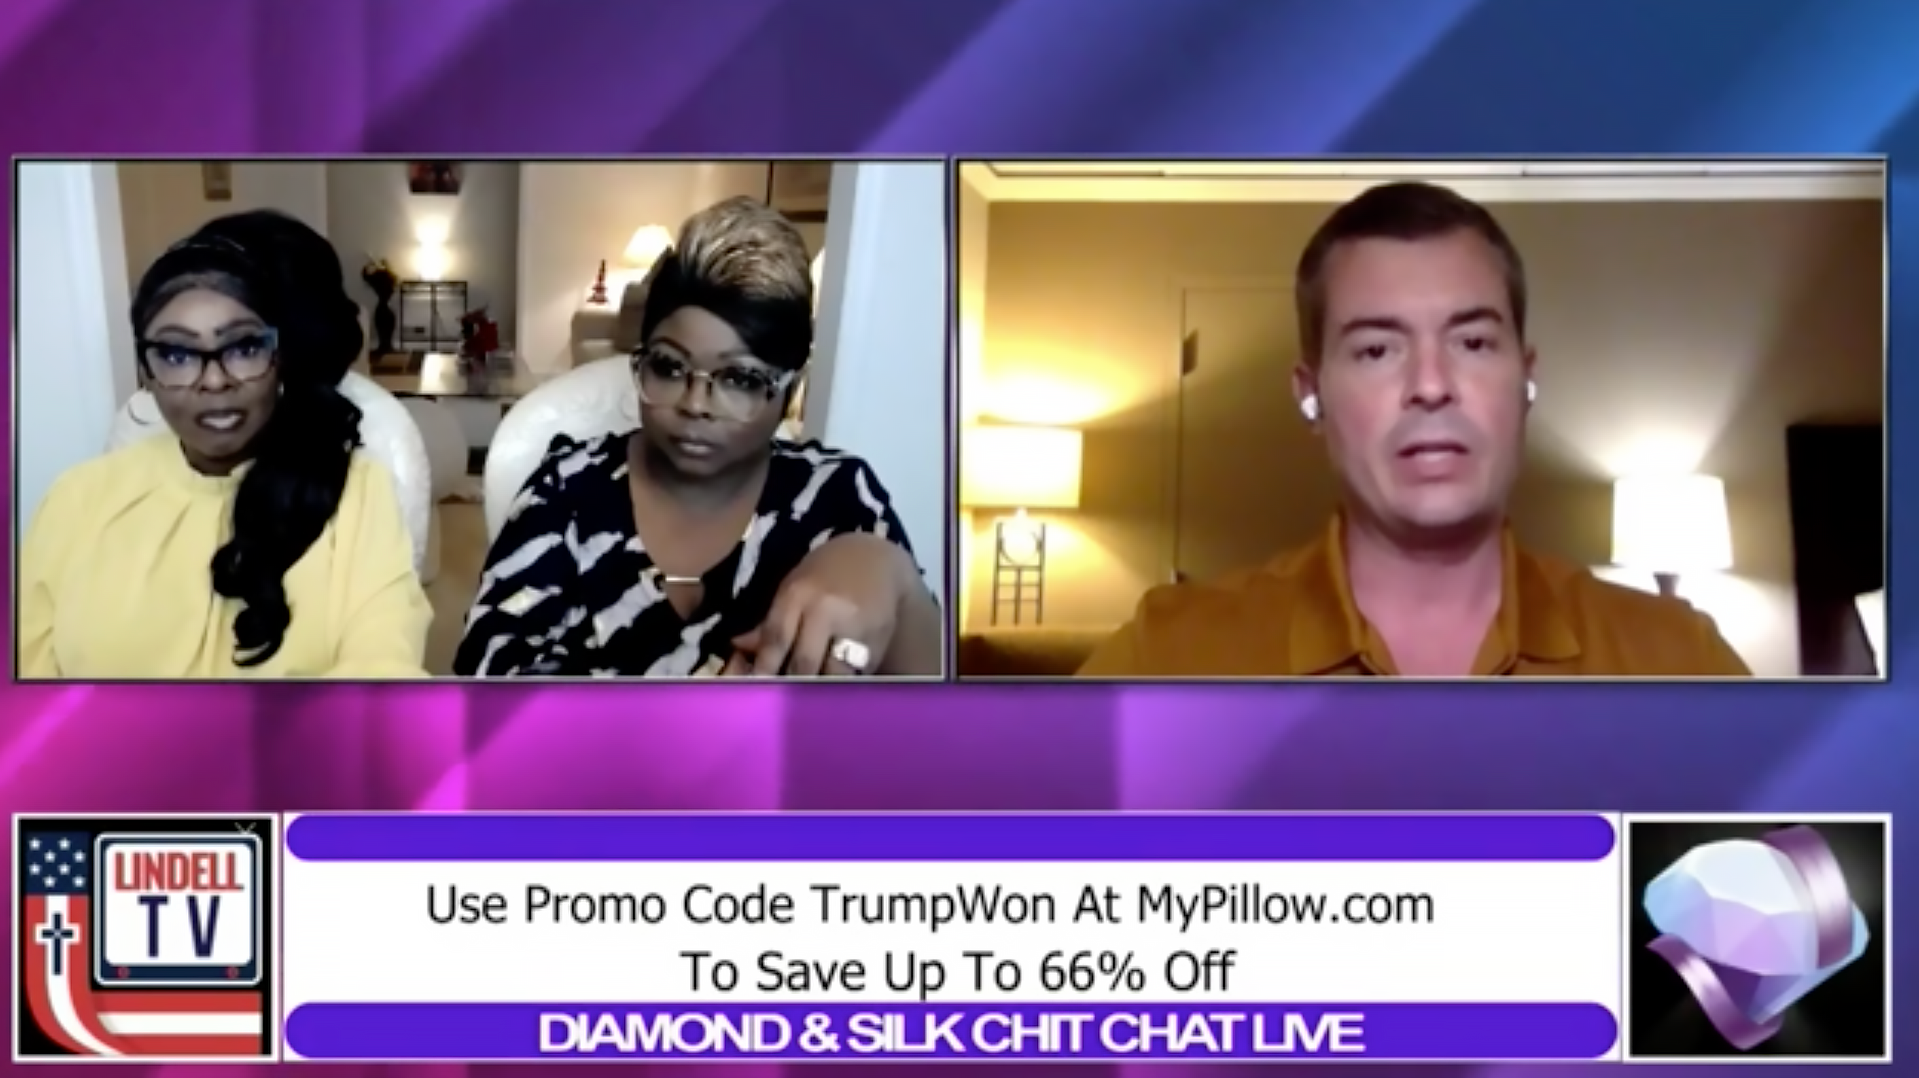 Diamond & Silk chat with Josh from US Freedom Flyers